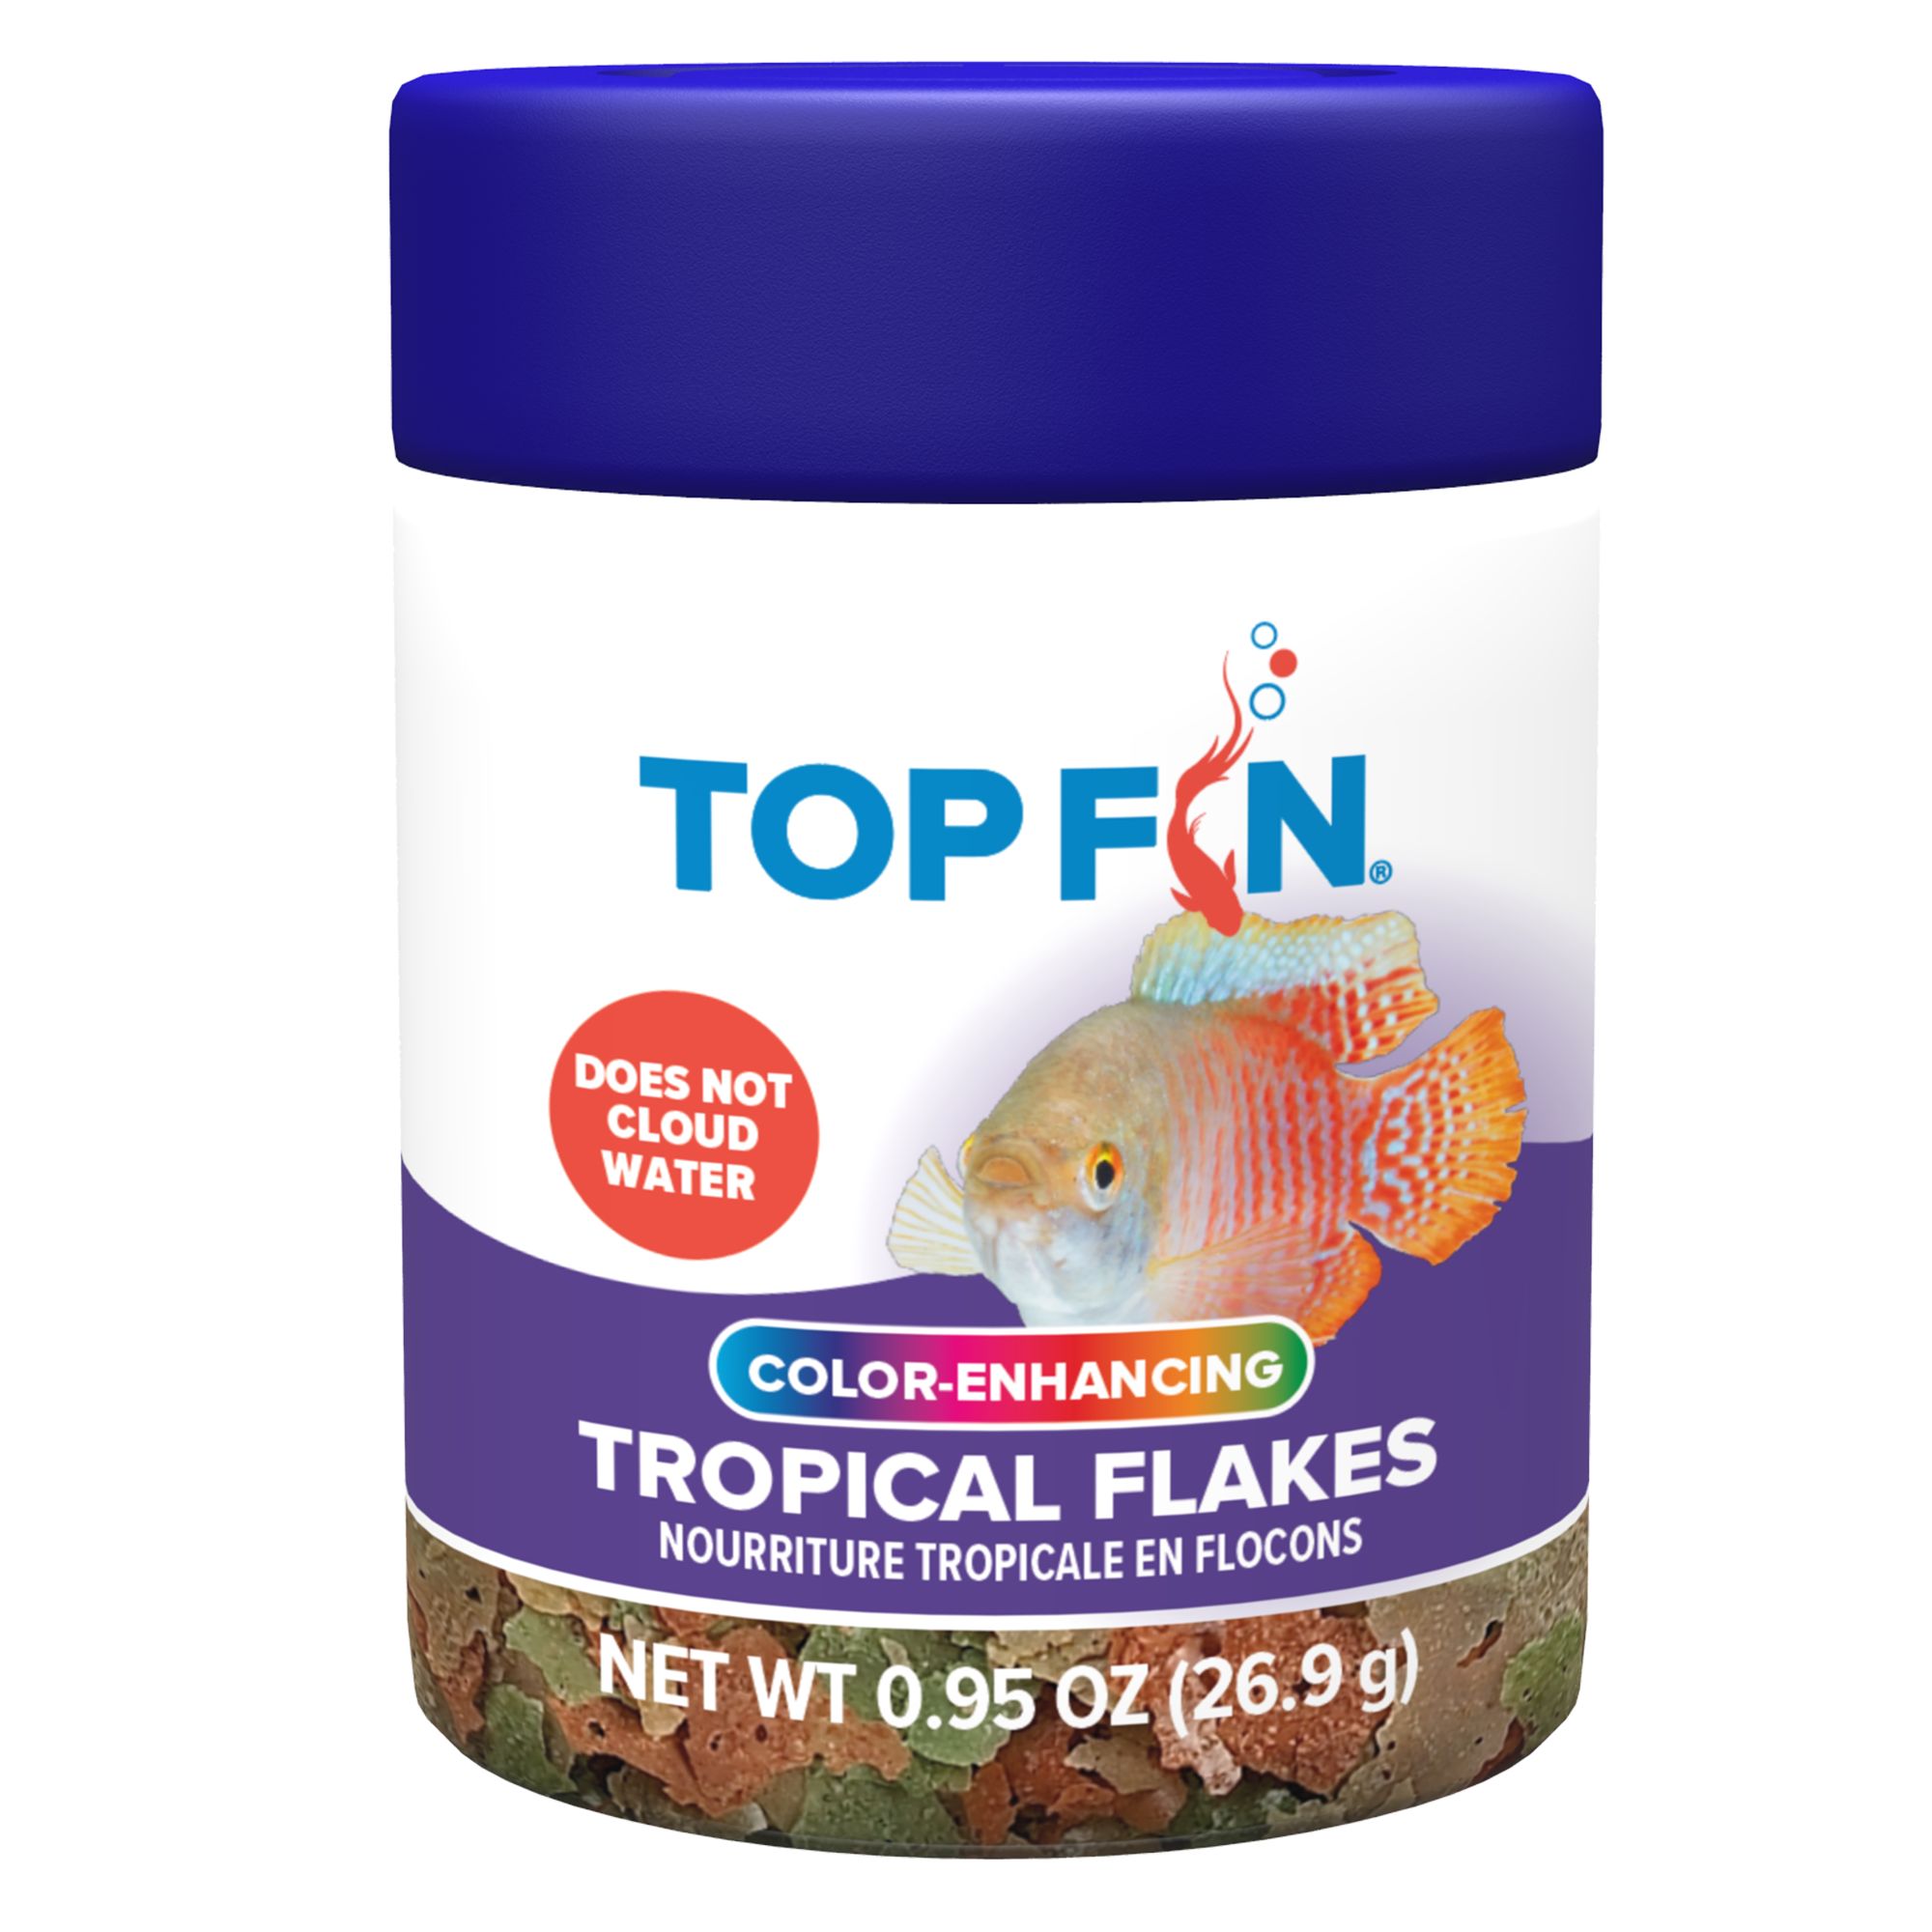 Top Fin® Tropical Fish Flakes